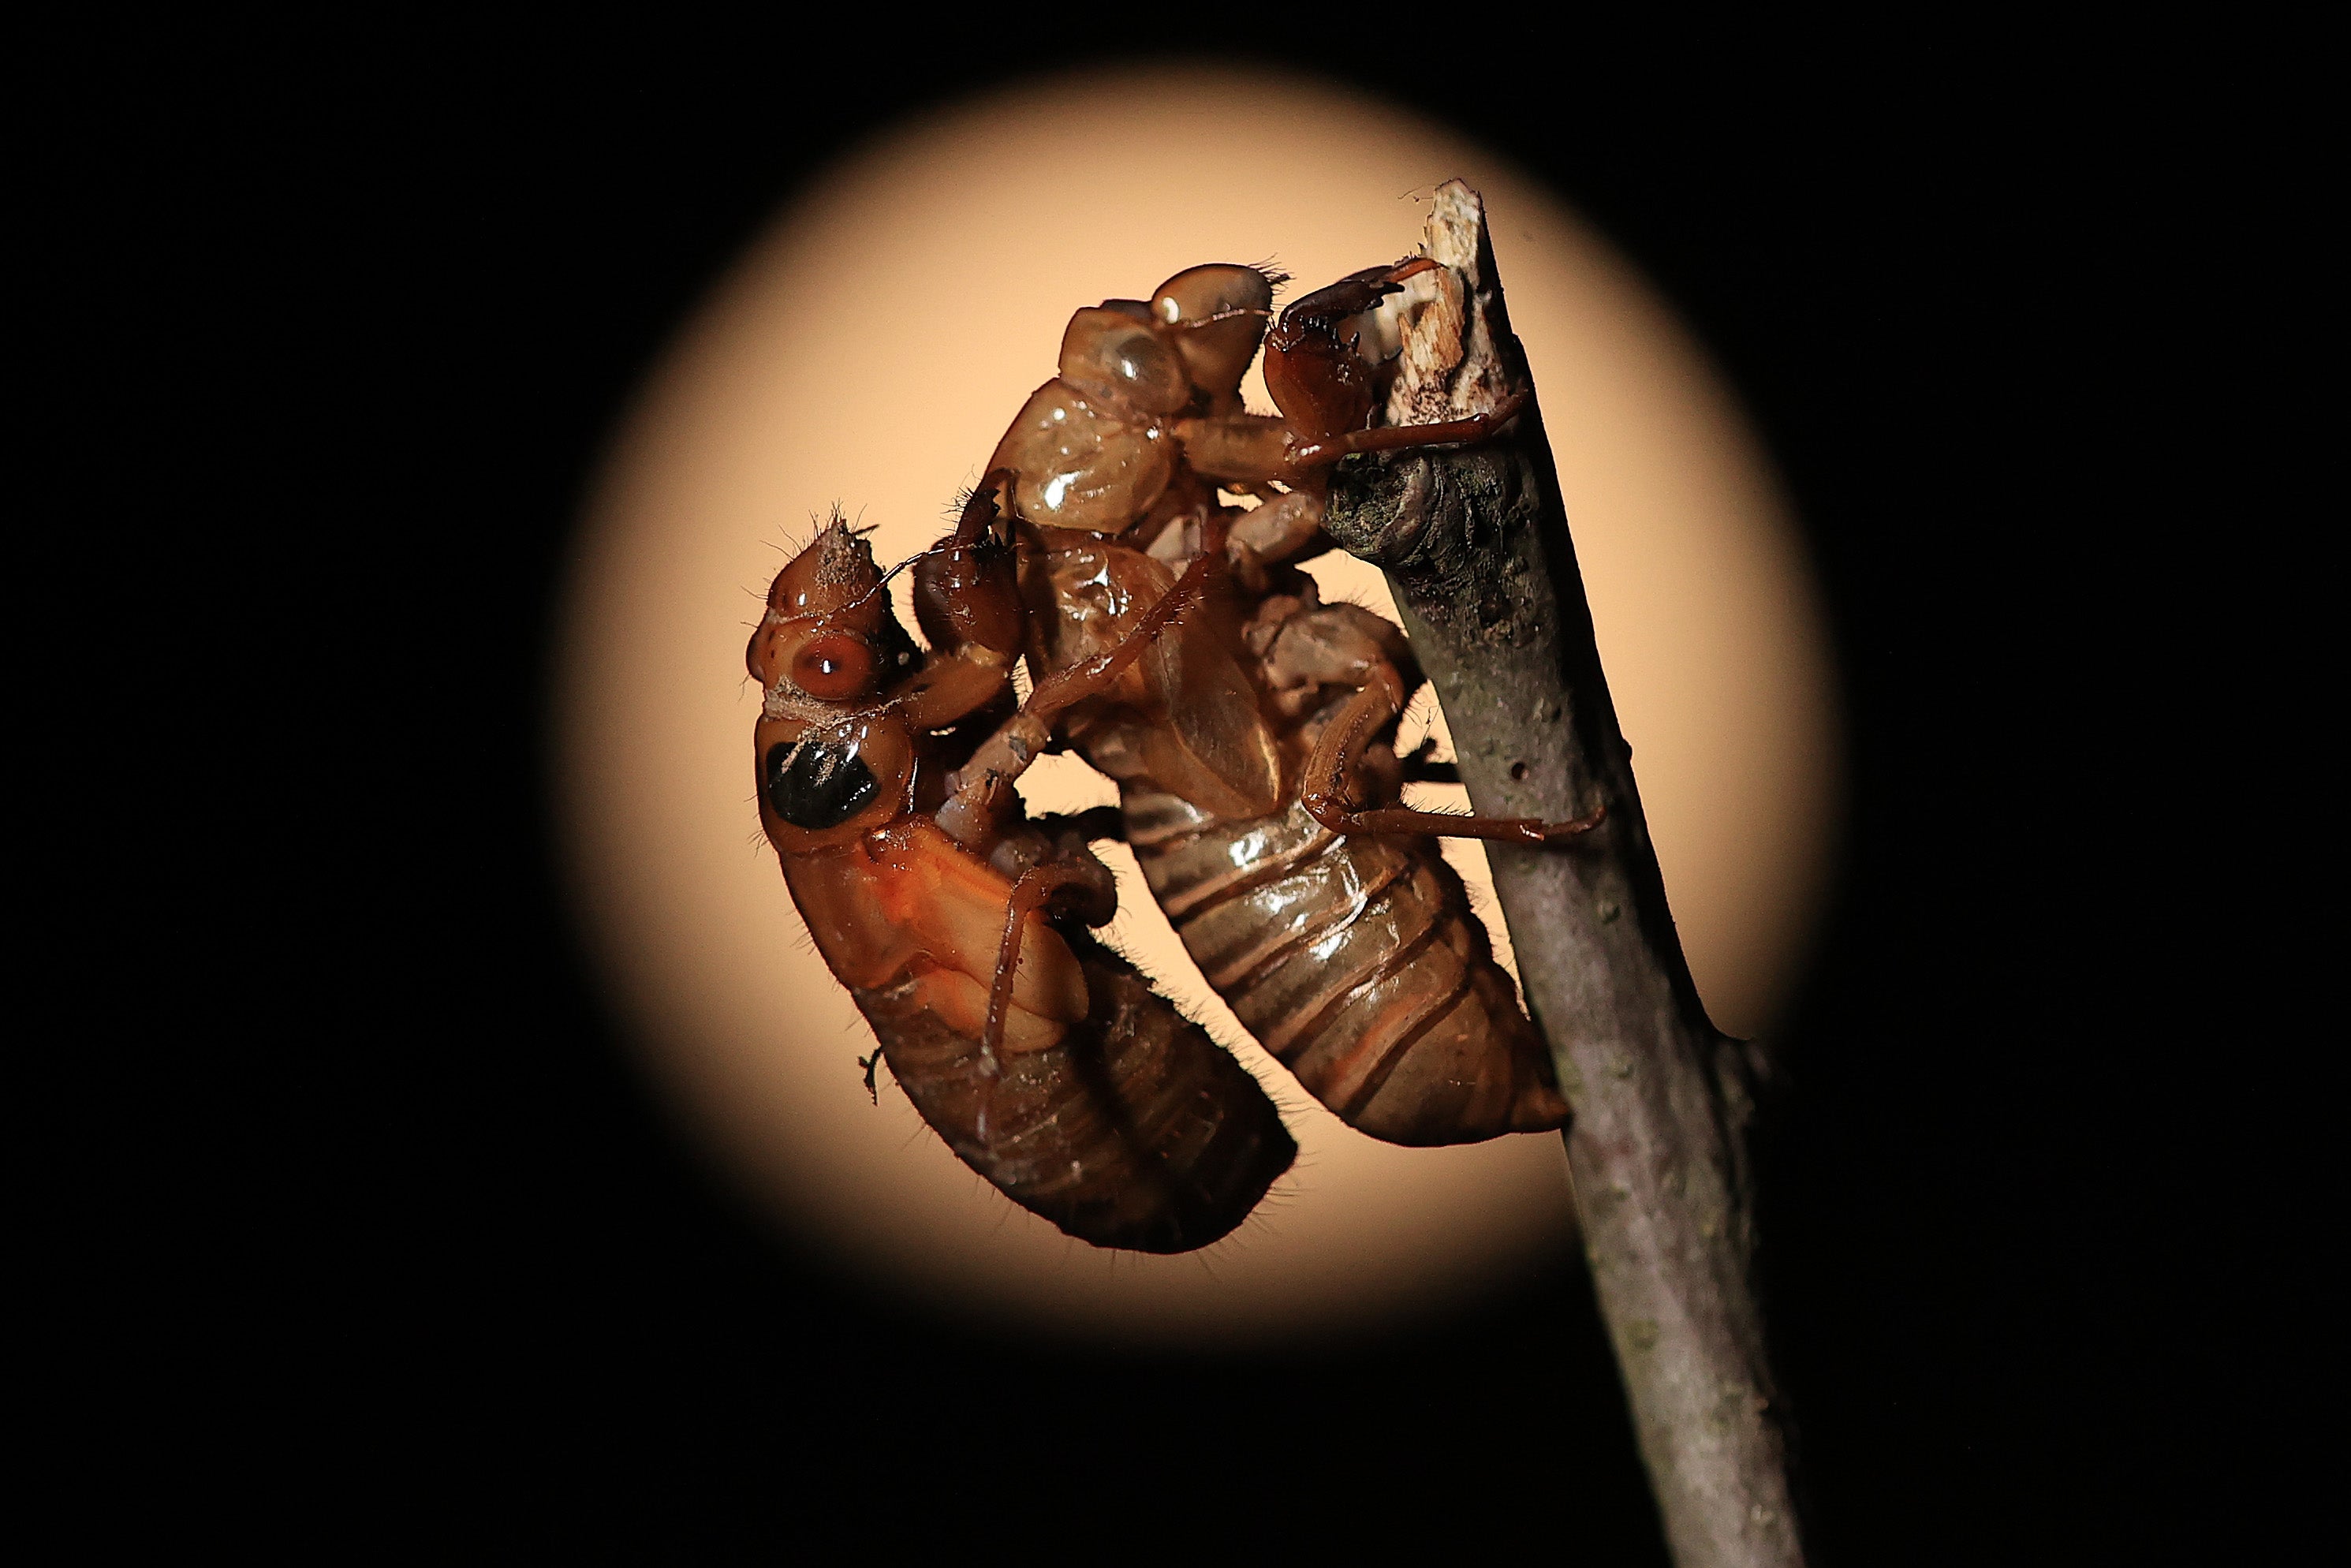 A Magicicada periodical cicada nymph clings to the empty shell of a previously molted cicada, the background is black with a circular warm colored area framing the nymph and shed cicada shell